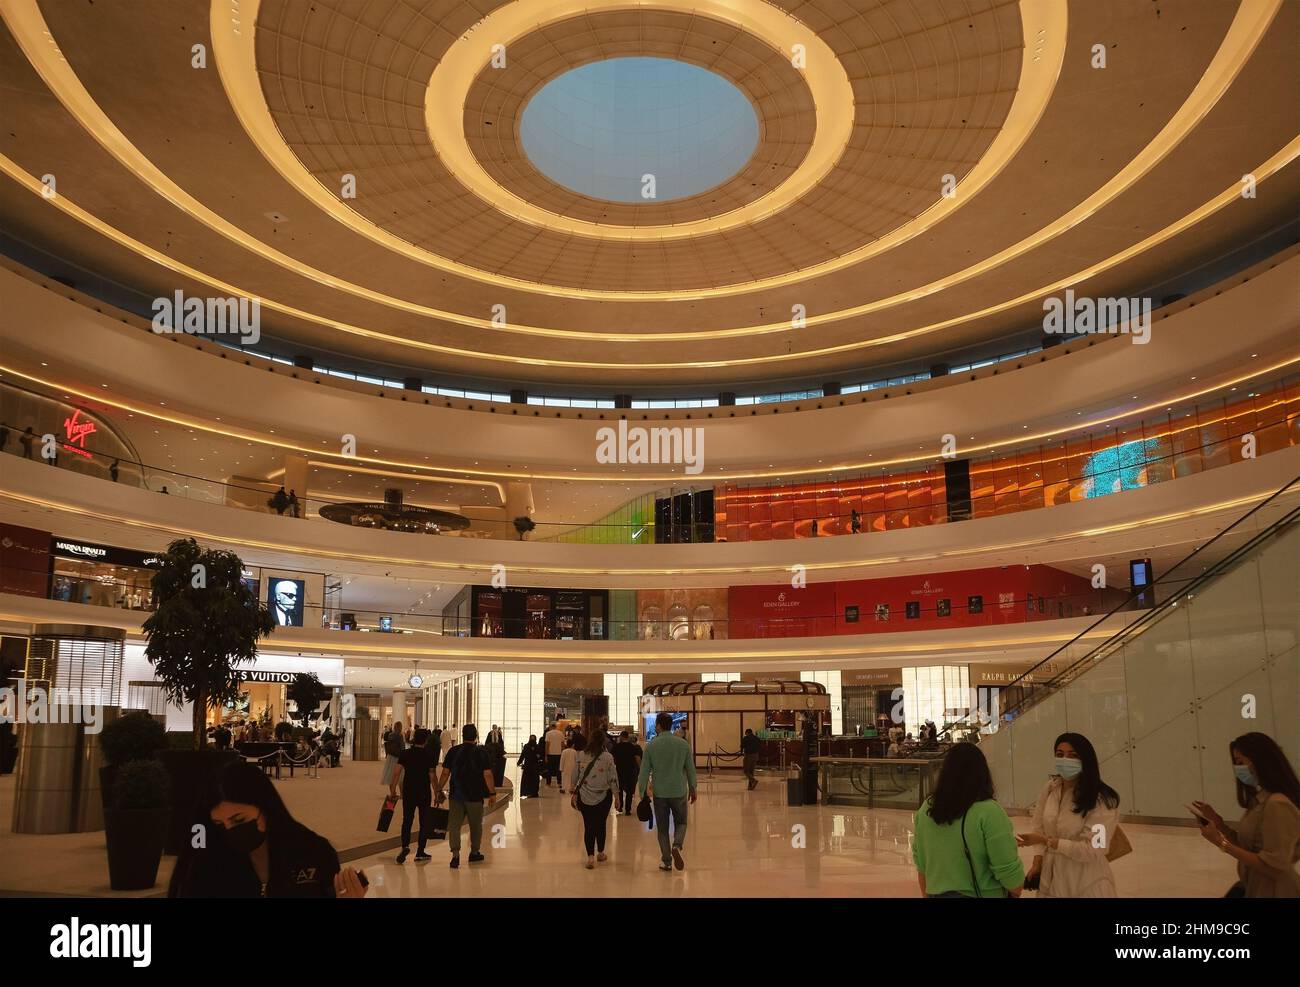 Dubai, United Arab Emirates - January 19, 2022: Interior of Dubai Mall, the biggest mall in town with a lot of fashion shops, restaurants and one big Stock Photo